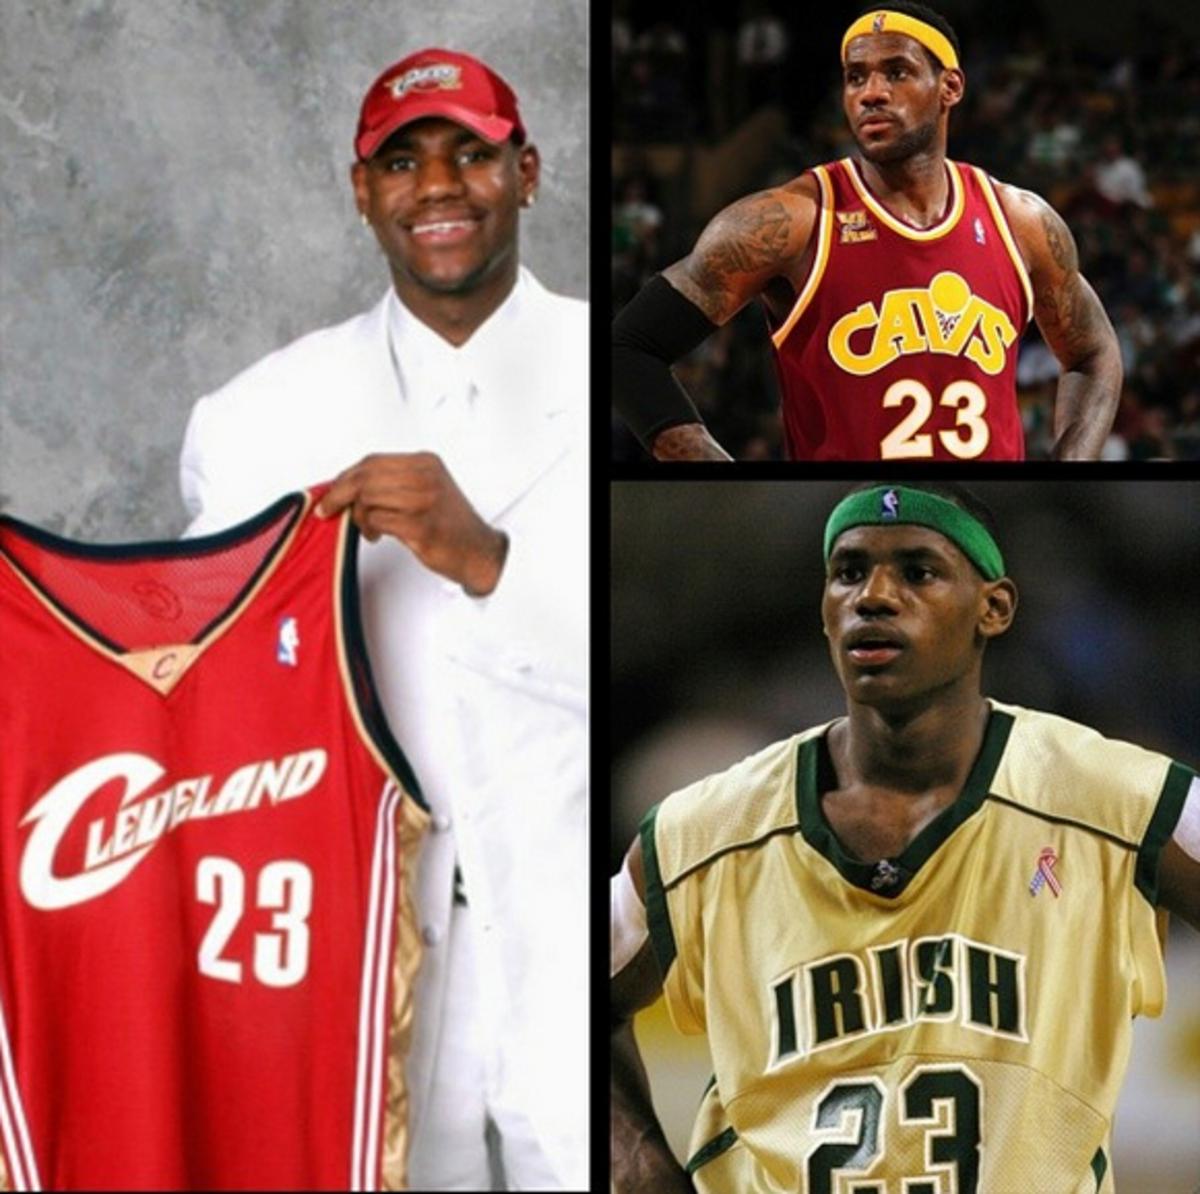 jersey number of lebron james